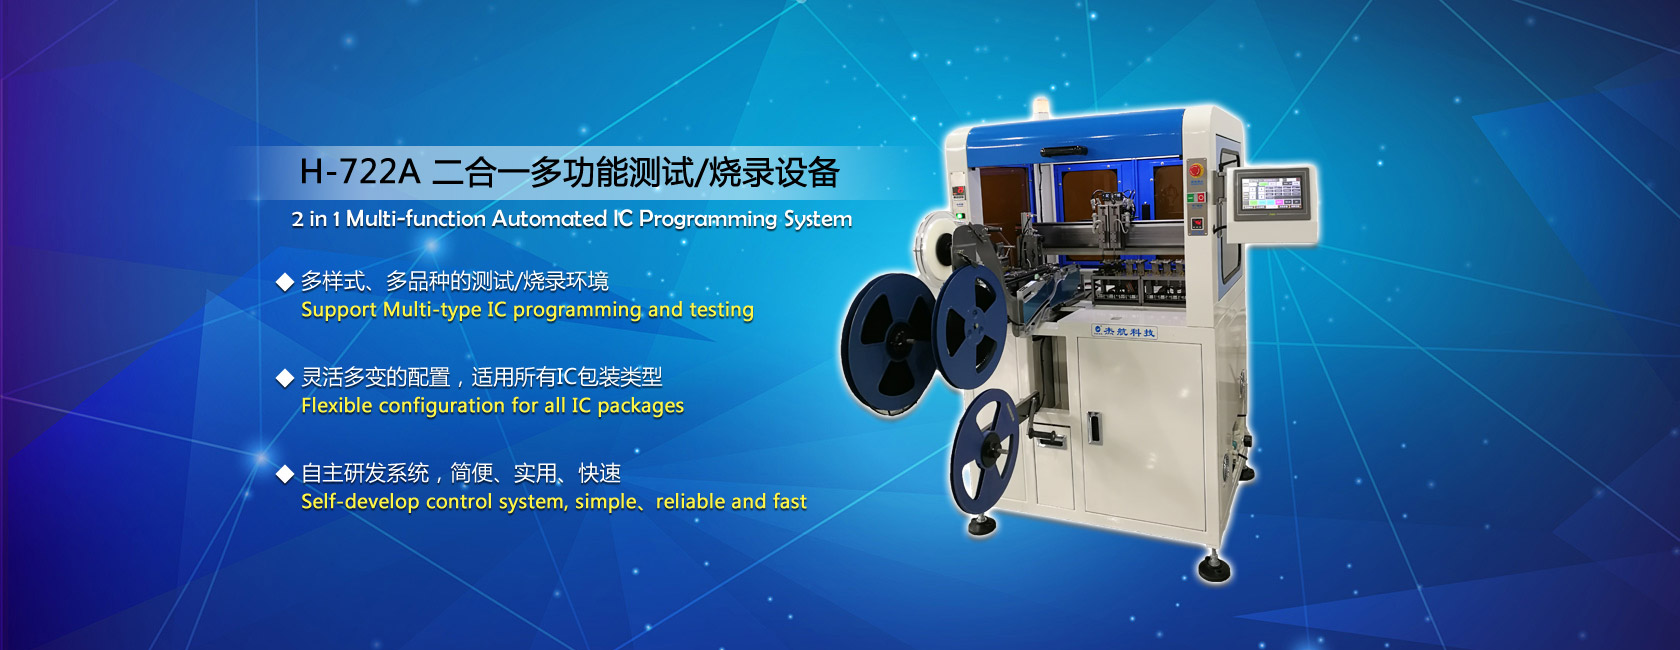 2 in 1 Multi-function Automated IC Programming System